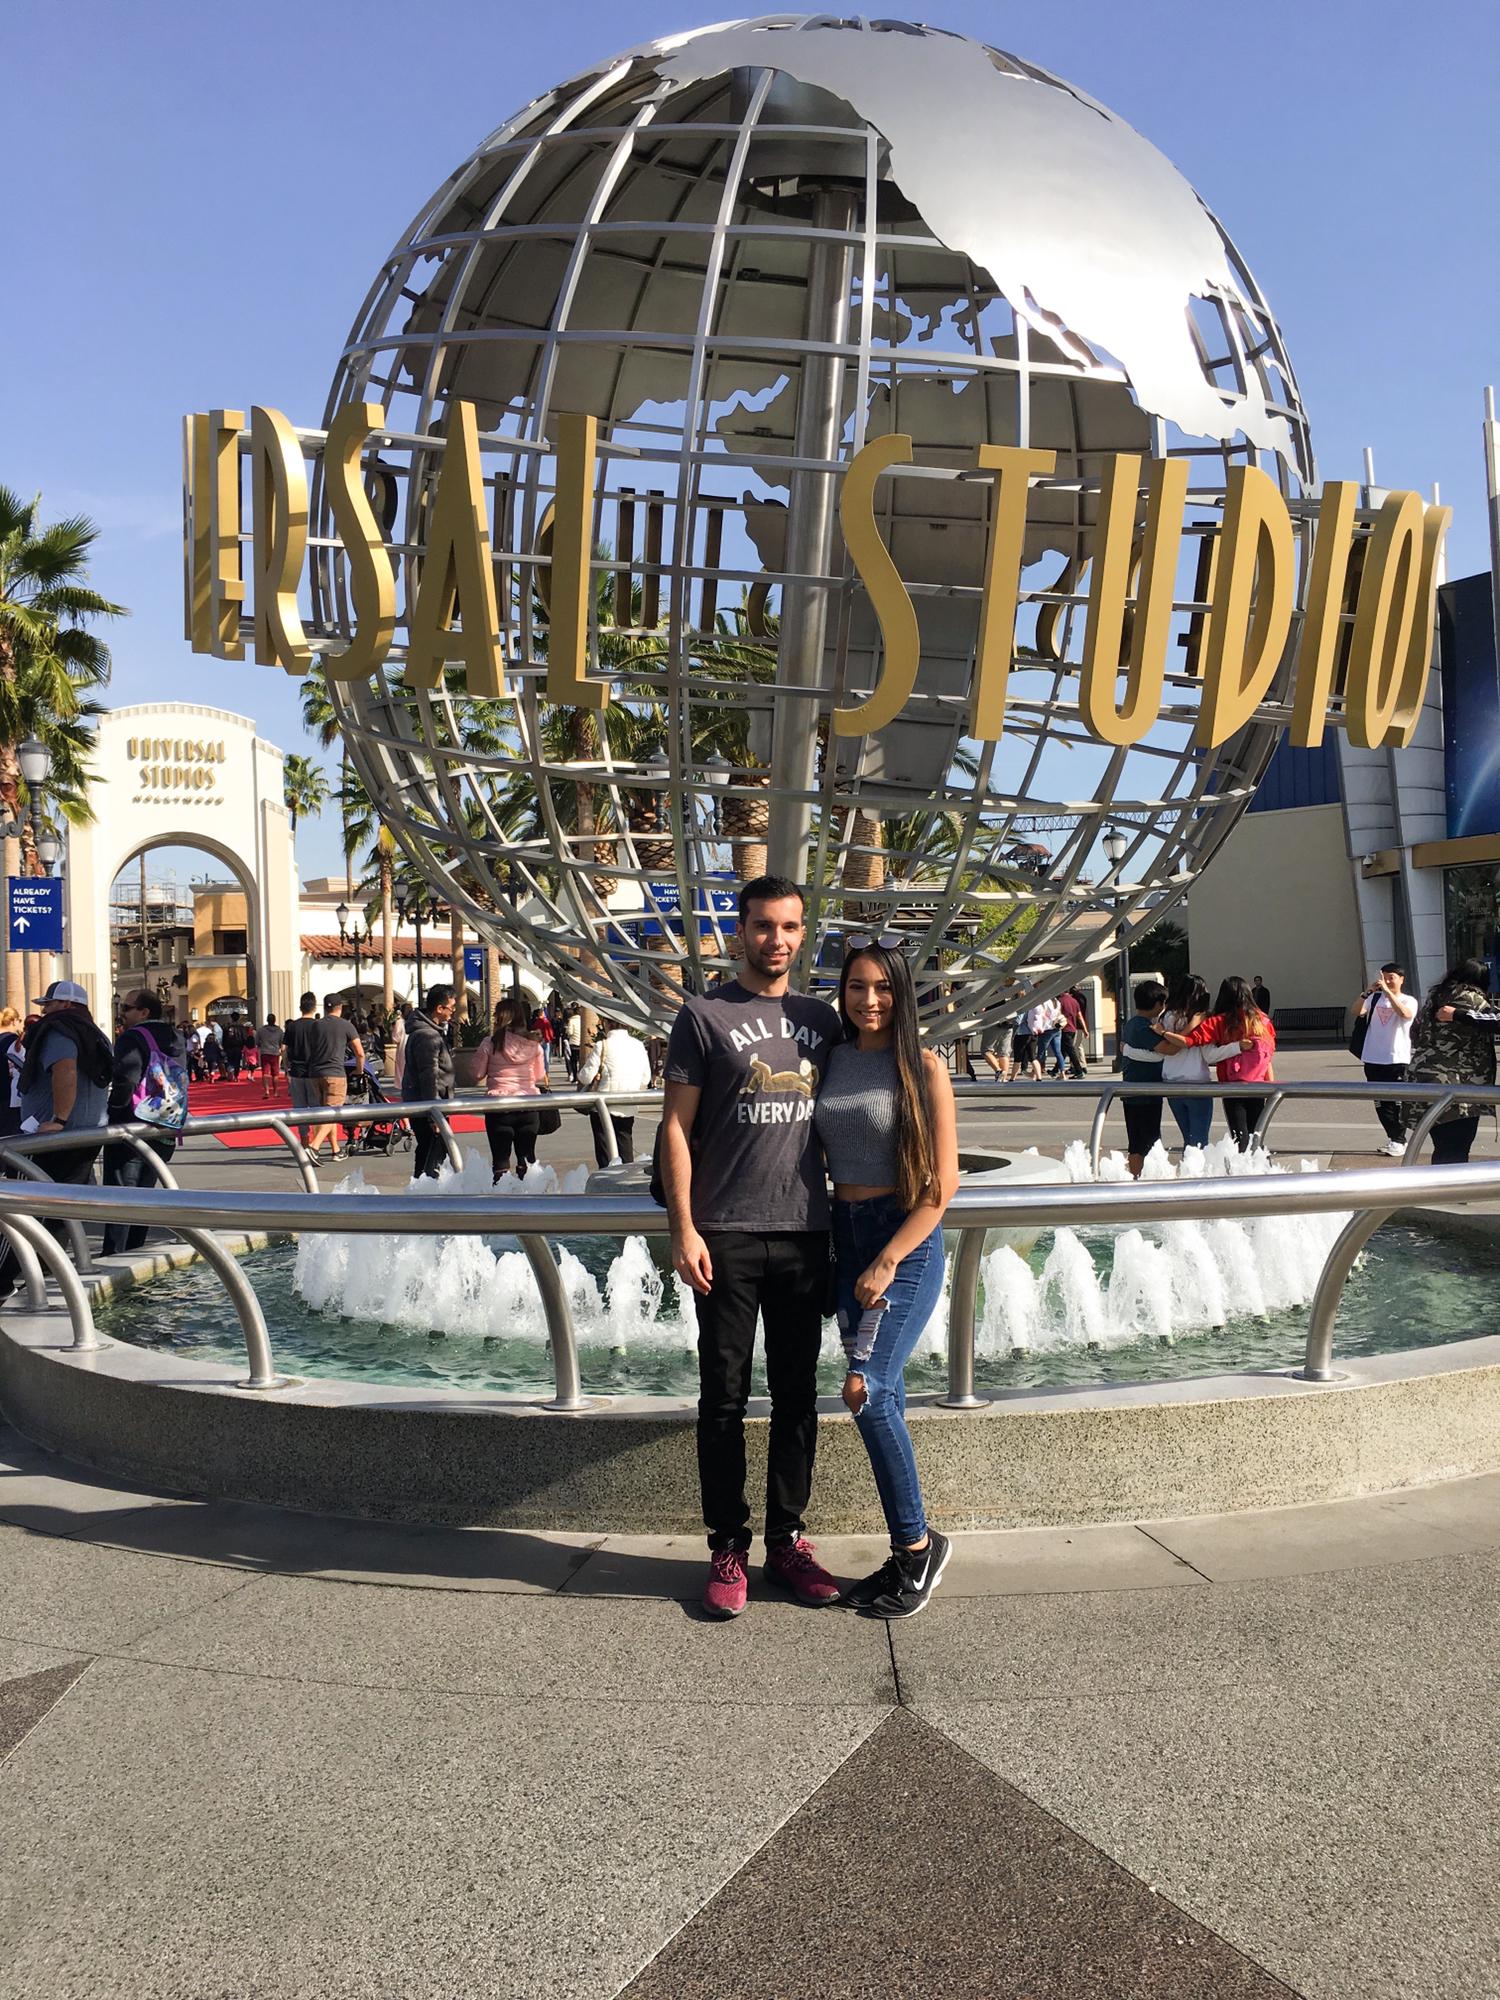 January 2018- Our first time in California. We had so much fun at Universal Studios!